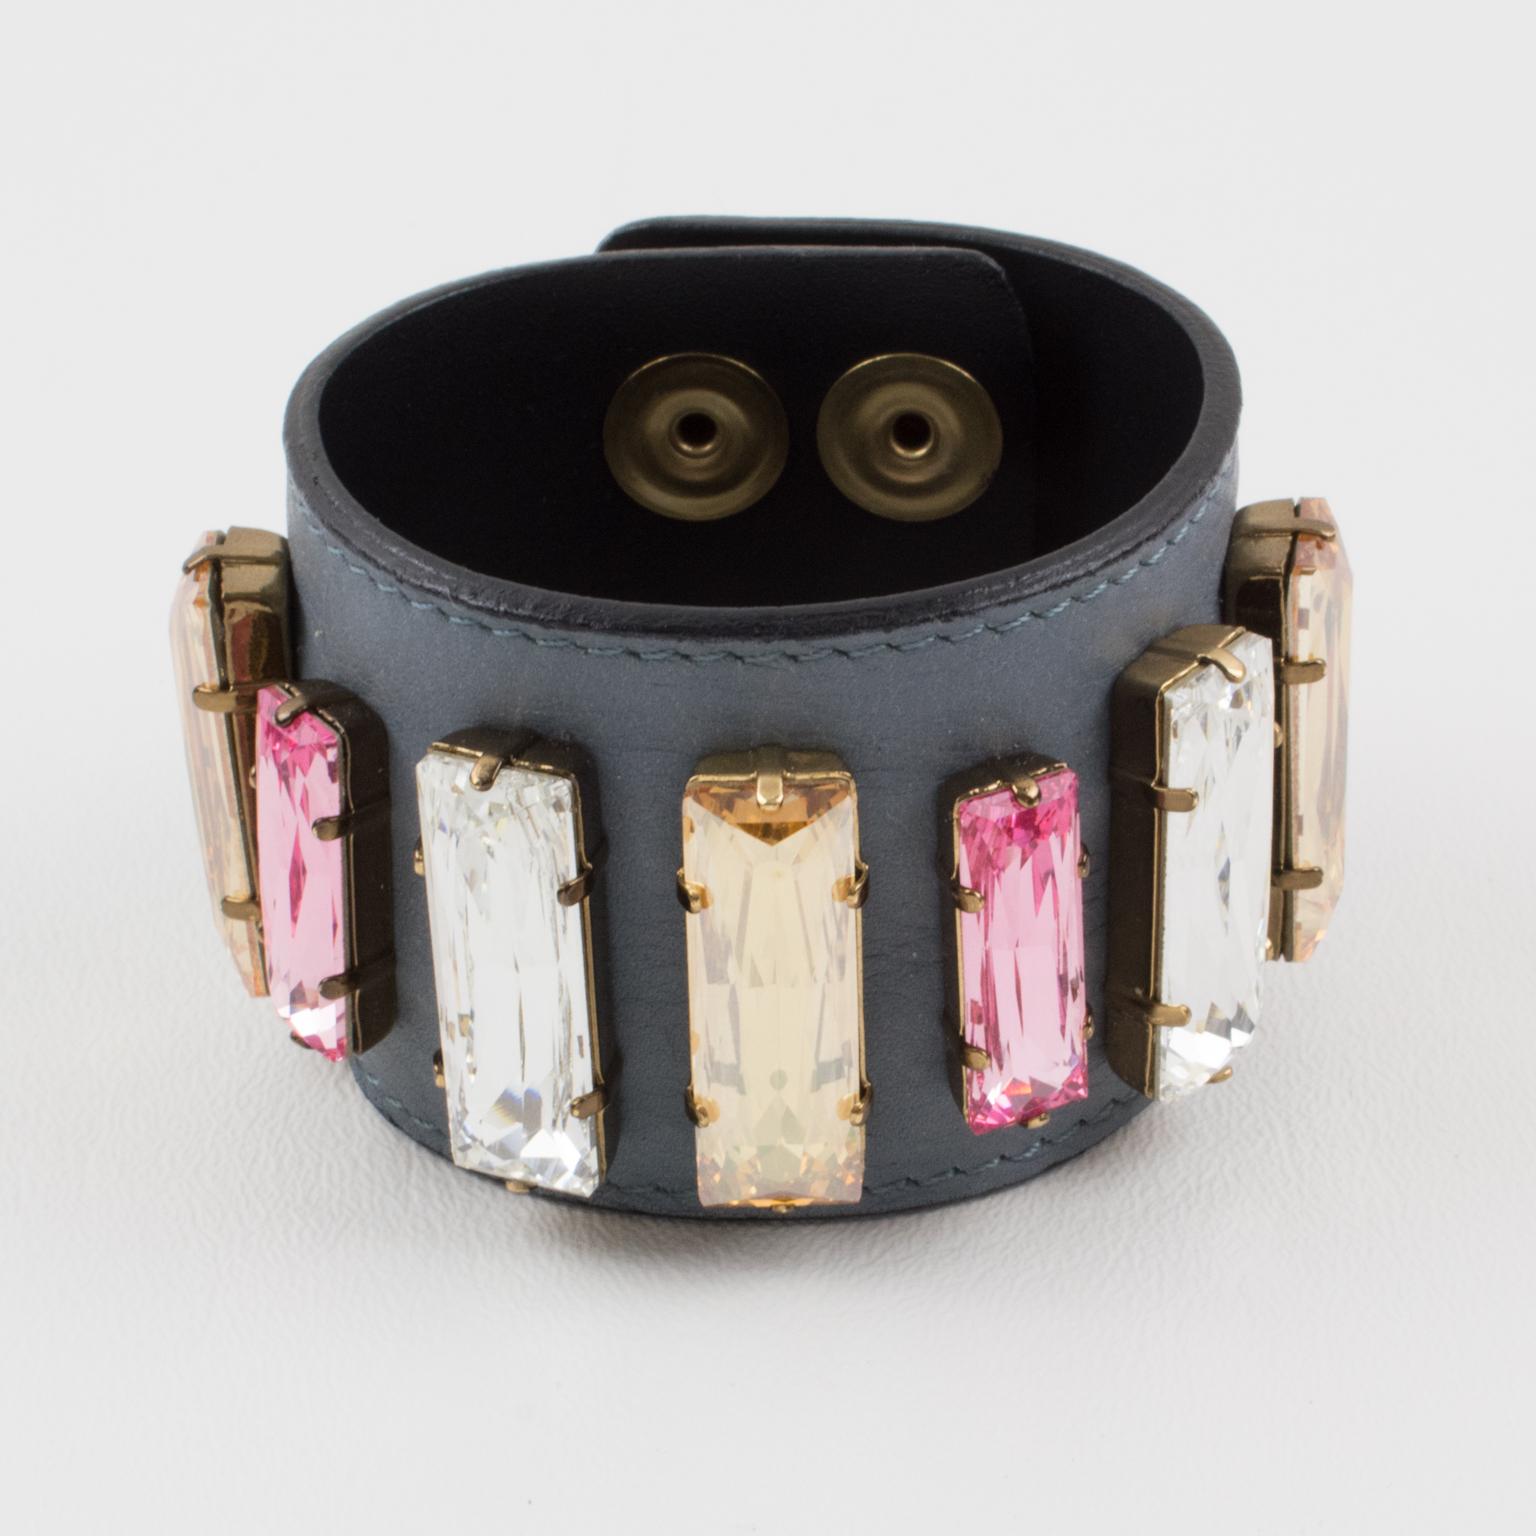 A Charming leather belt bracelet designed by Sonia Rykiel, Paris. This piece features an oversized stitched mouse gray leather large band ornate with pastel colors crystal rhinestones in an assorted long stick shape. Assorted colors of clear